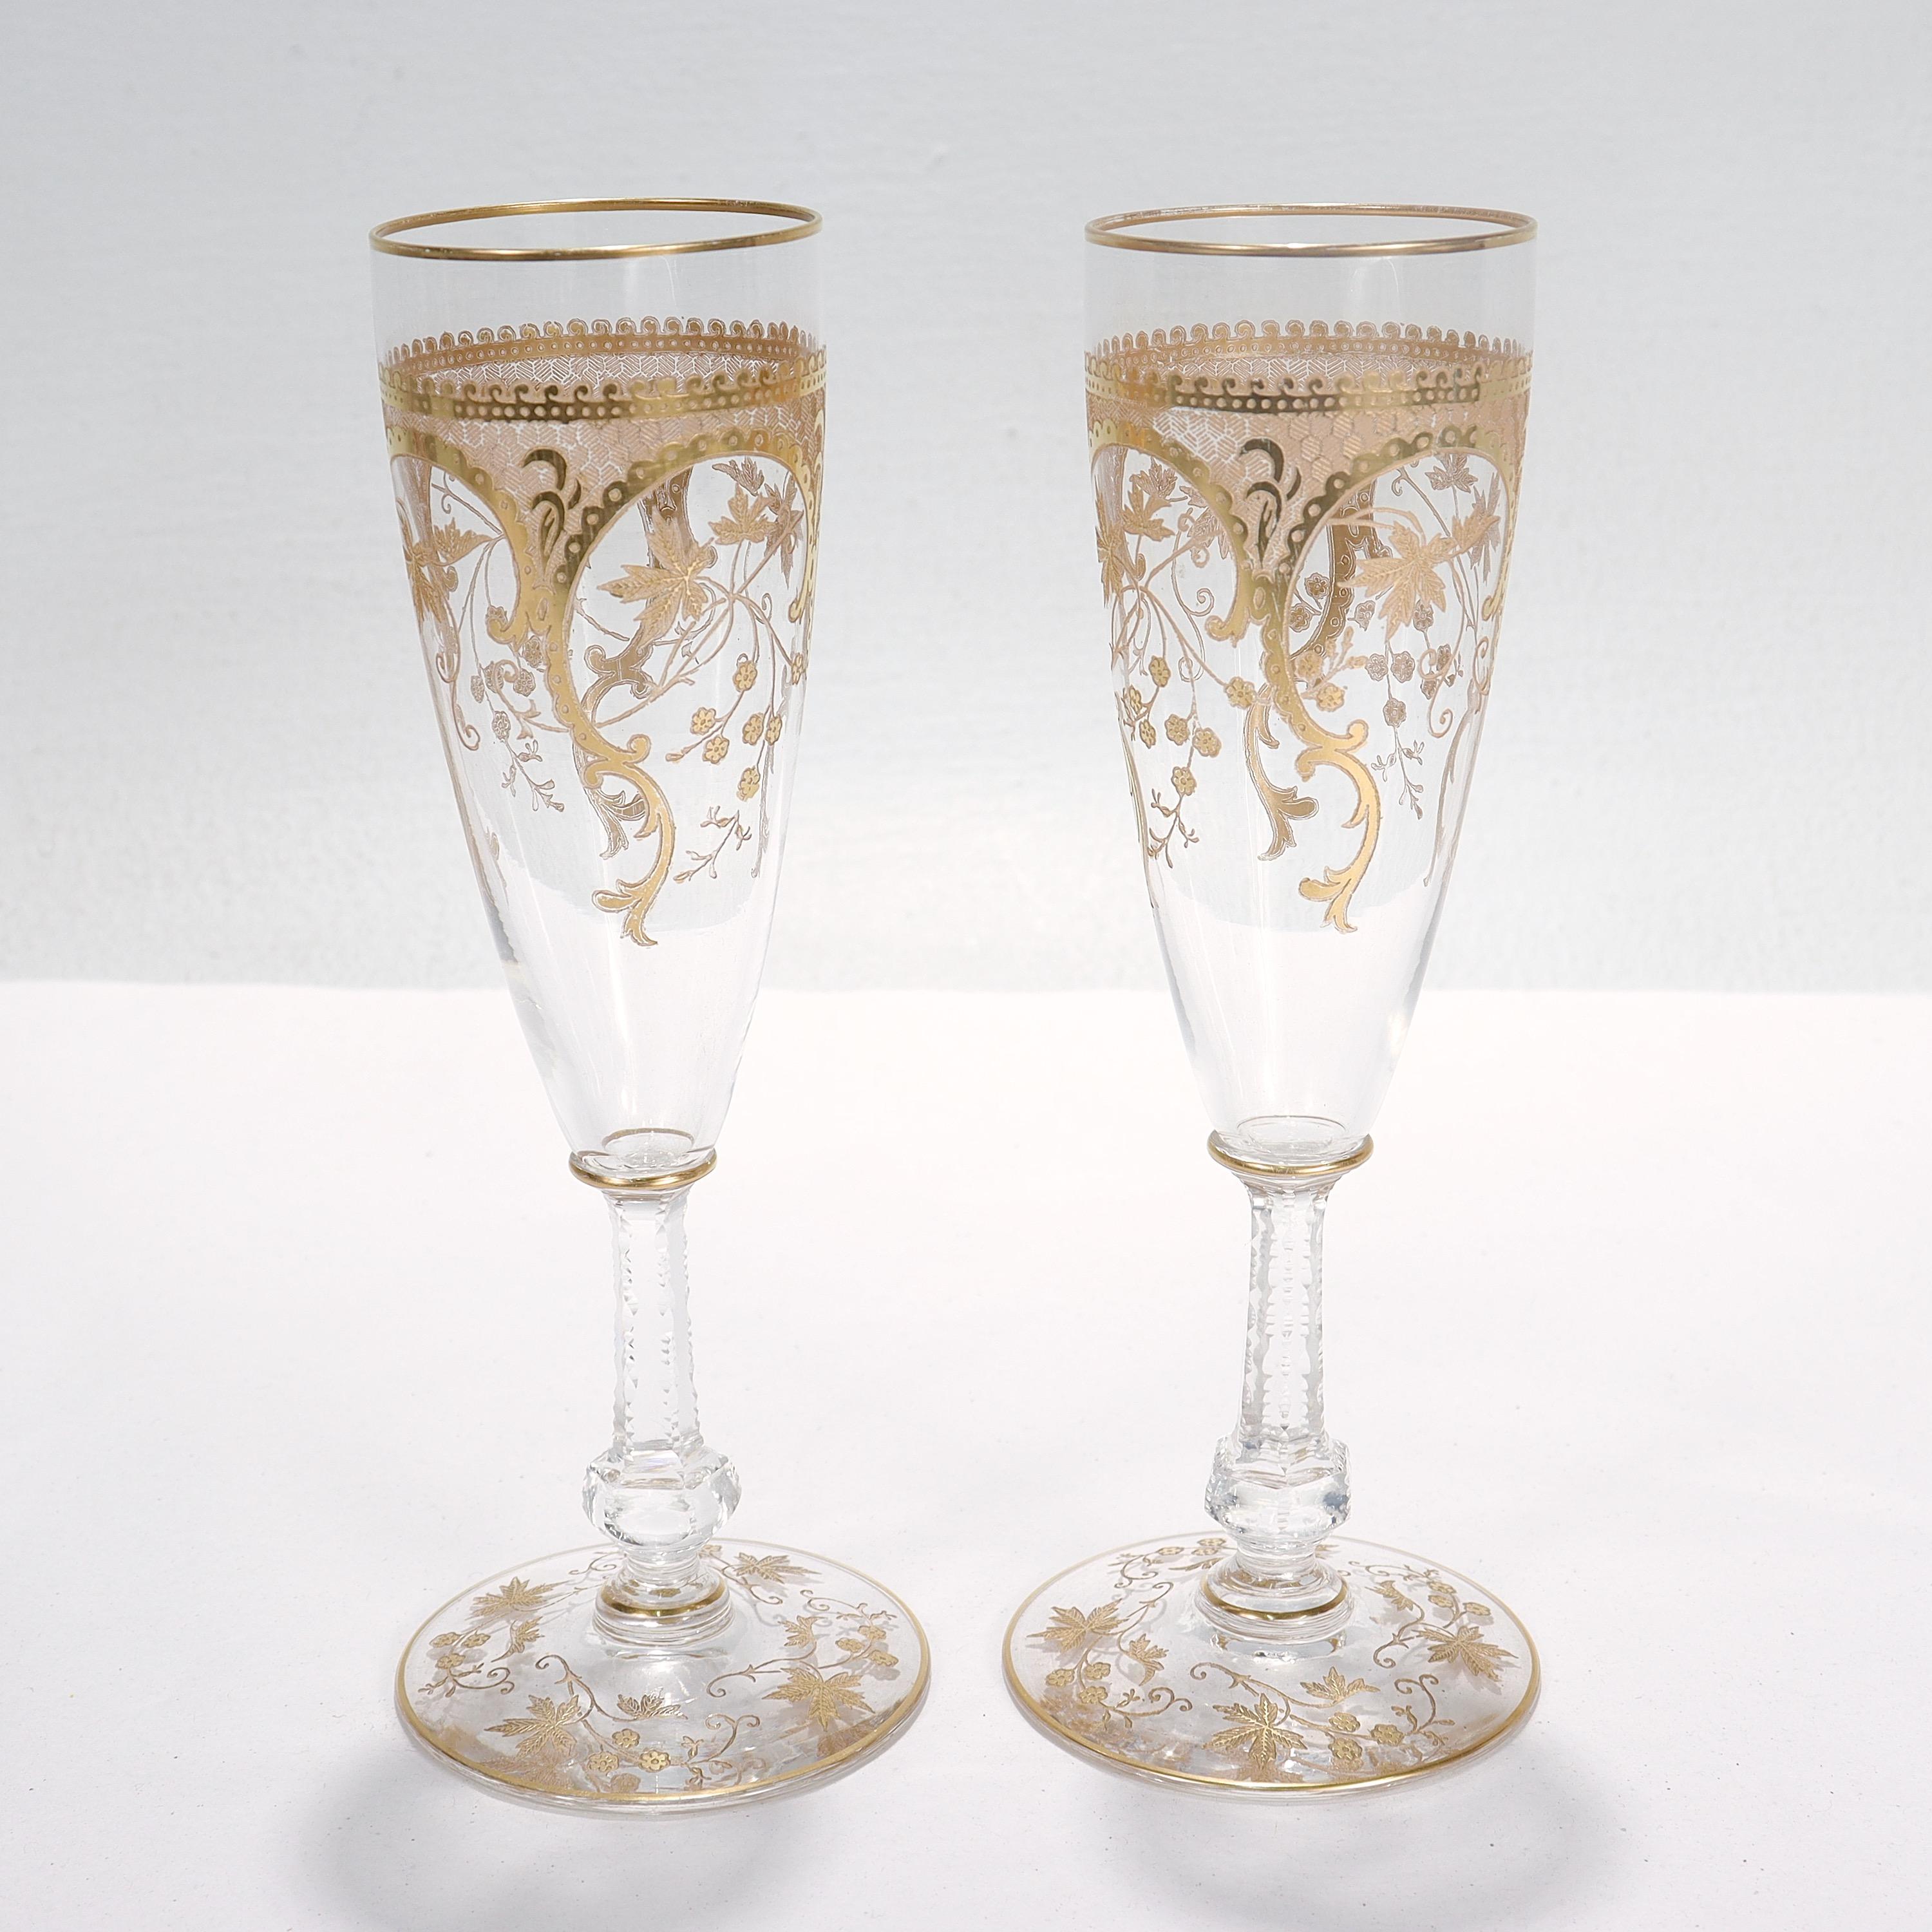 A pair of very fine old or antique champagne stems or flutes.

In molded and cut glass with finely etched & richly gilt flower & vine trellis fretwork designs throughout.

Perfect for the special toast!

Date:
20th Century

Overall Condition:
They